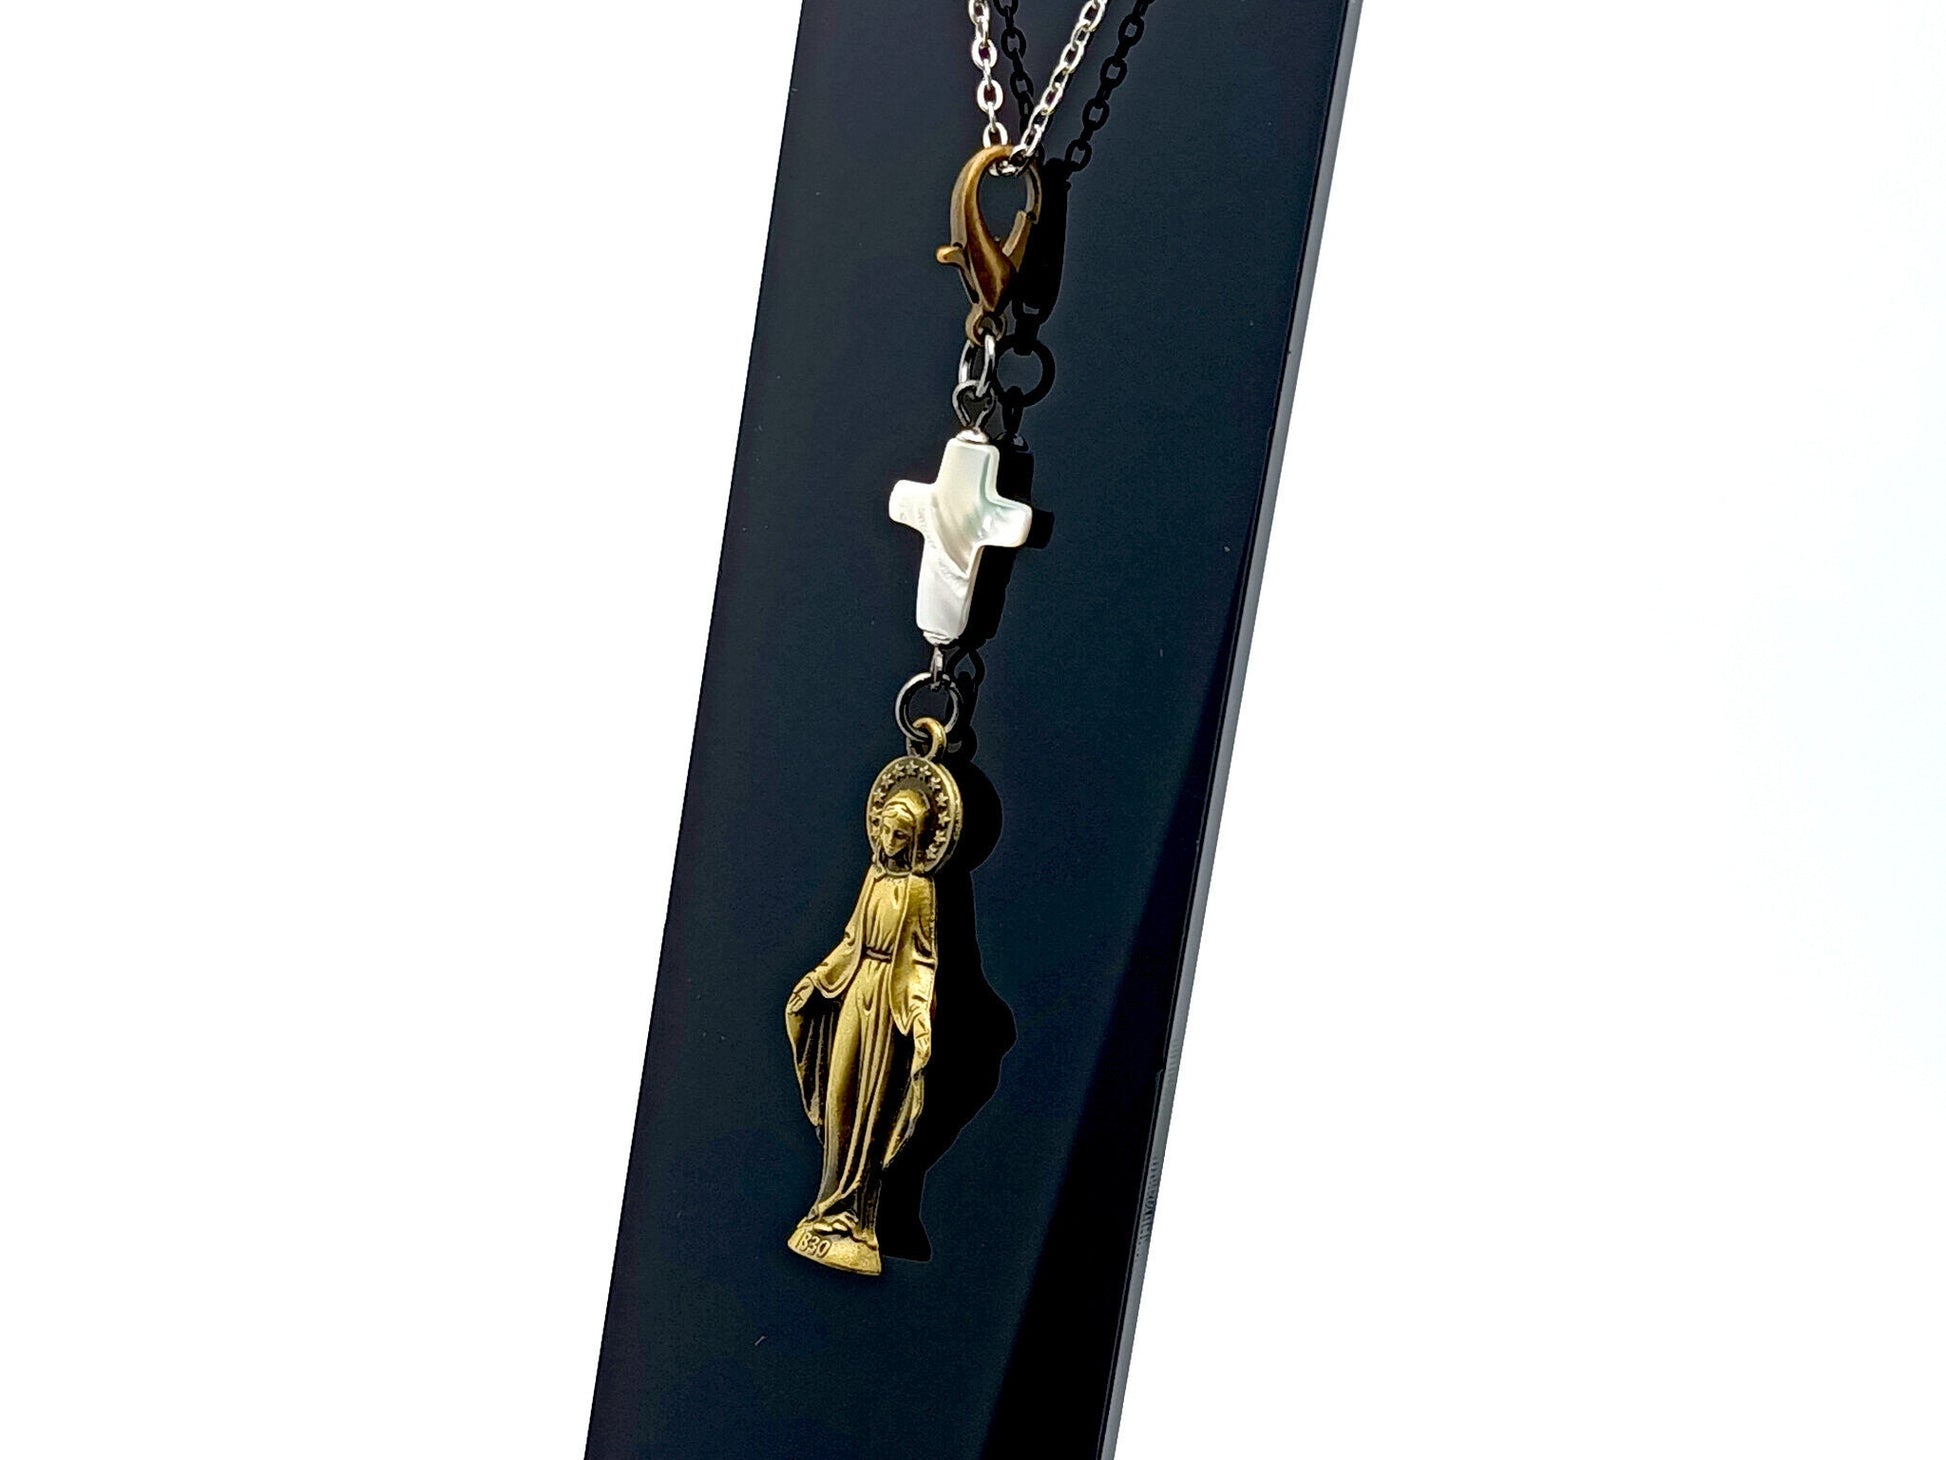 Our Lady of Grace unique rosary beads key fob purse clip with mother of pearl cross and lobster clasp.